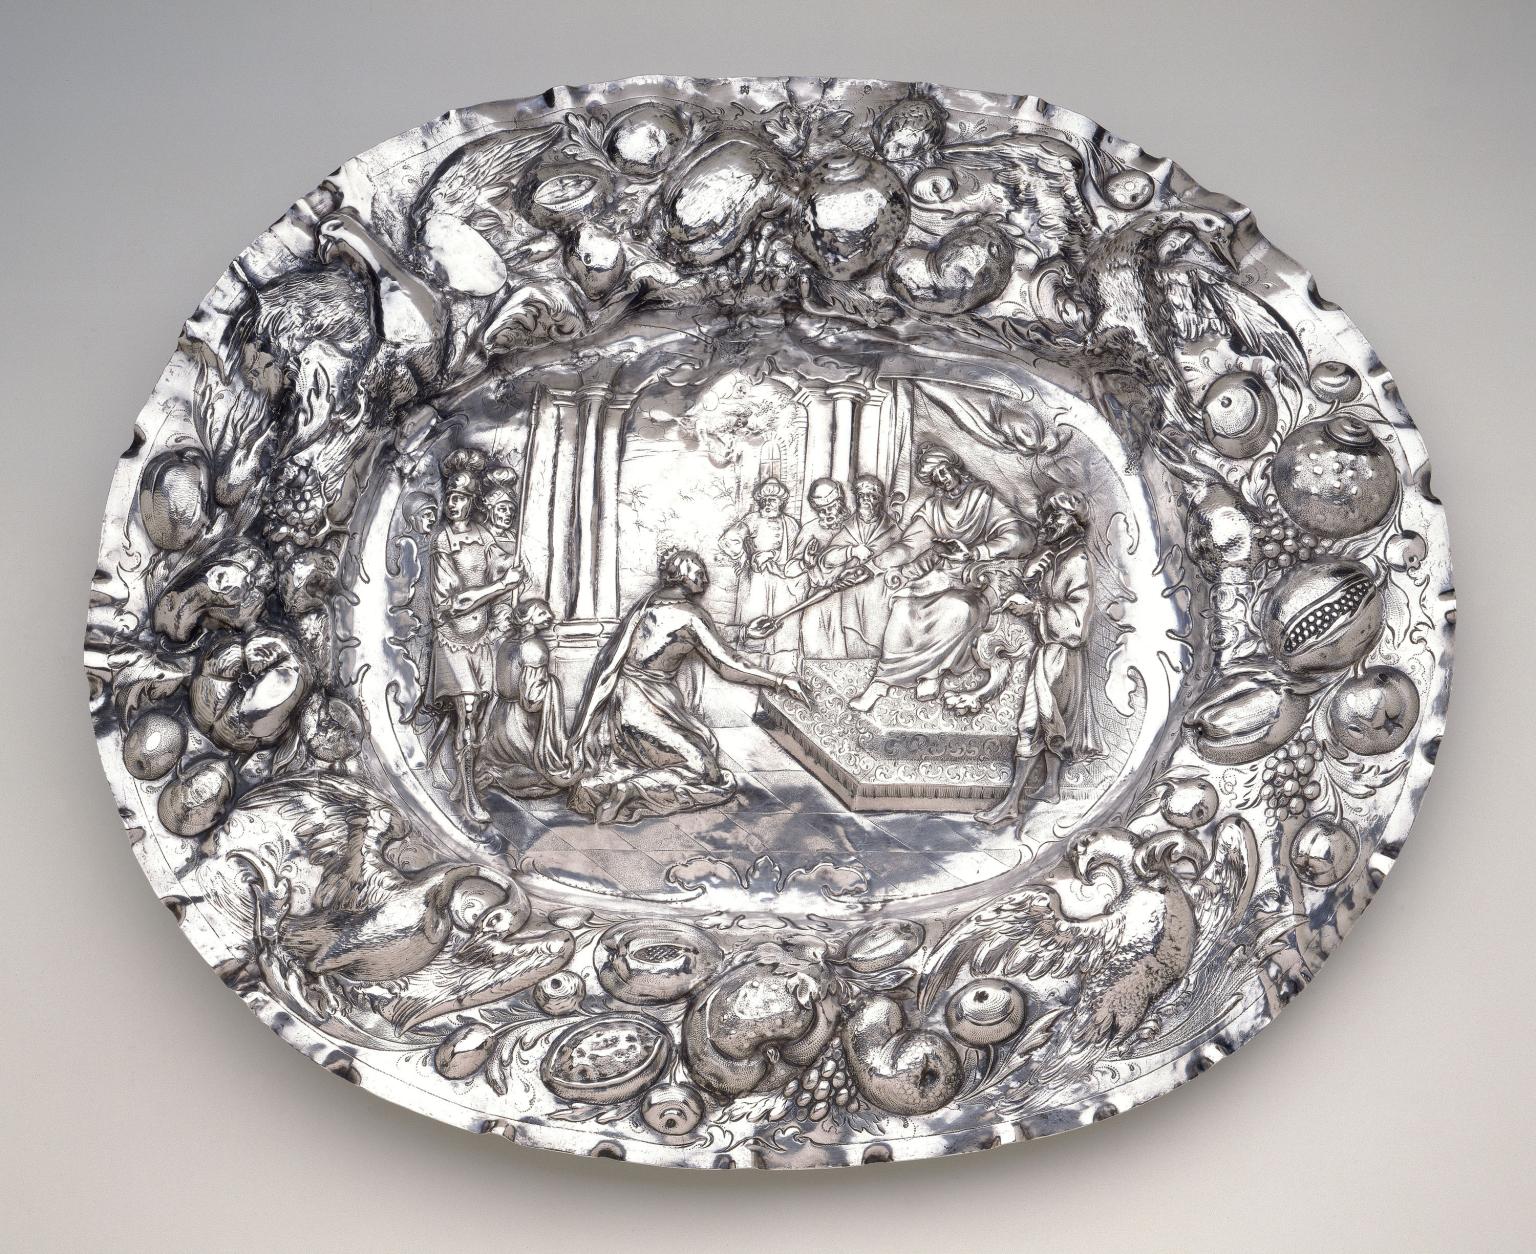 Metal tray with repoussé images of birds and fruit around rim, and image of king and subjects in center. 